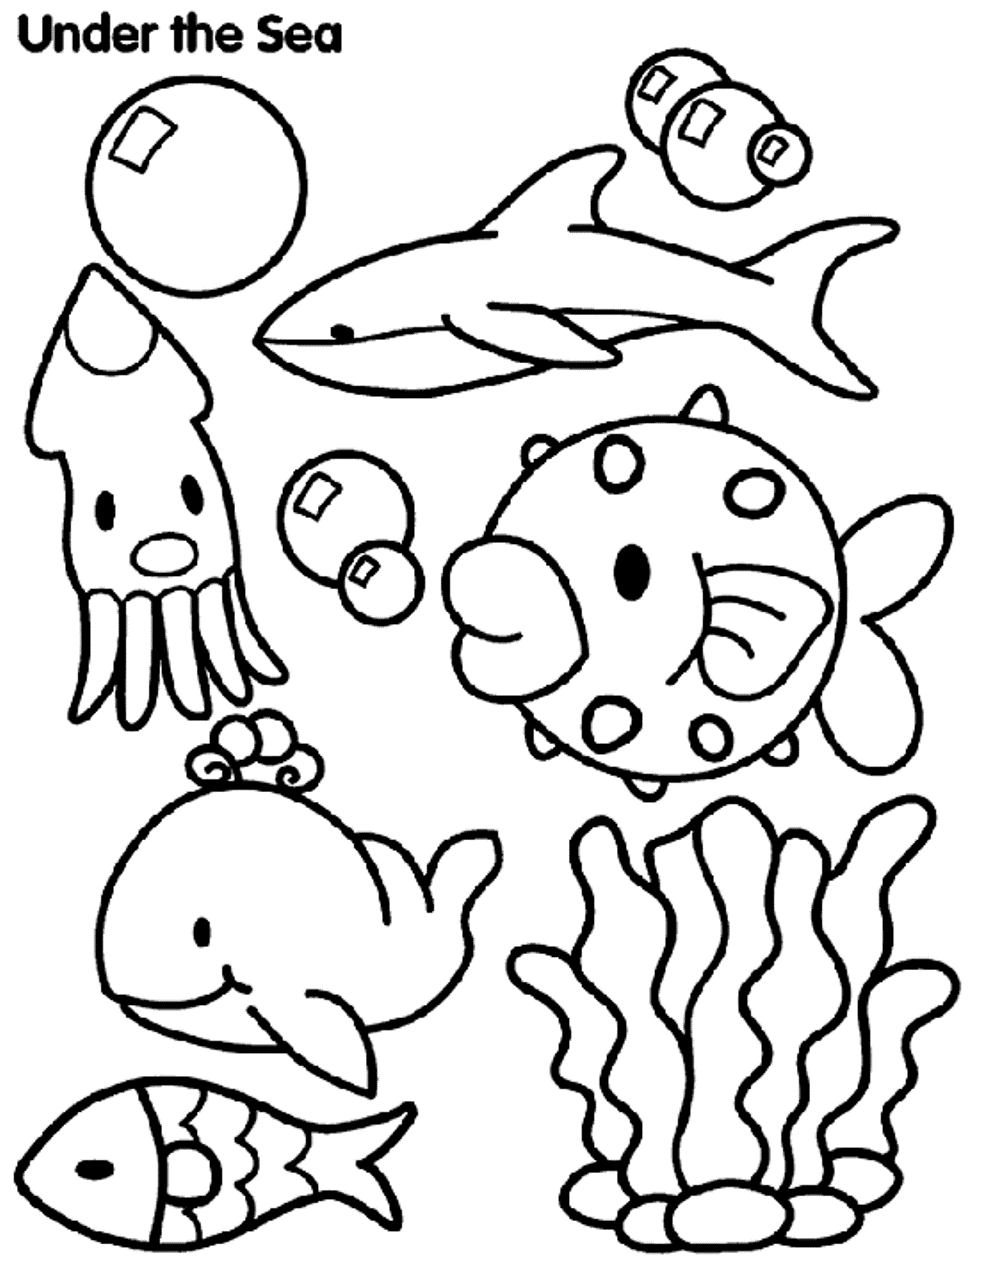 under the sea creatures coloring pages Coloring4free